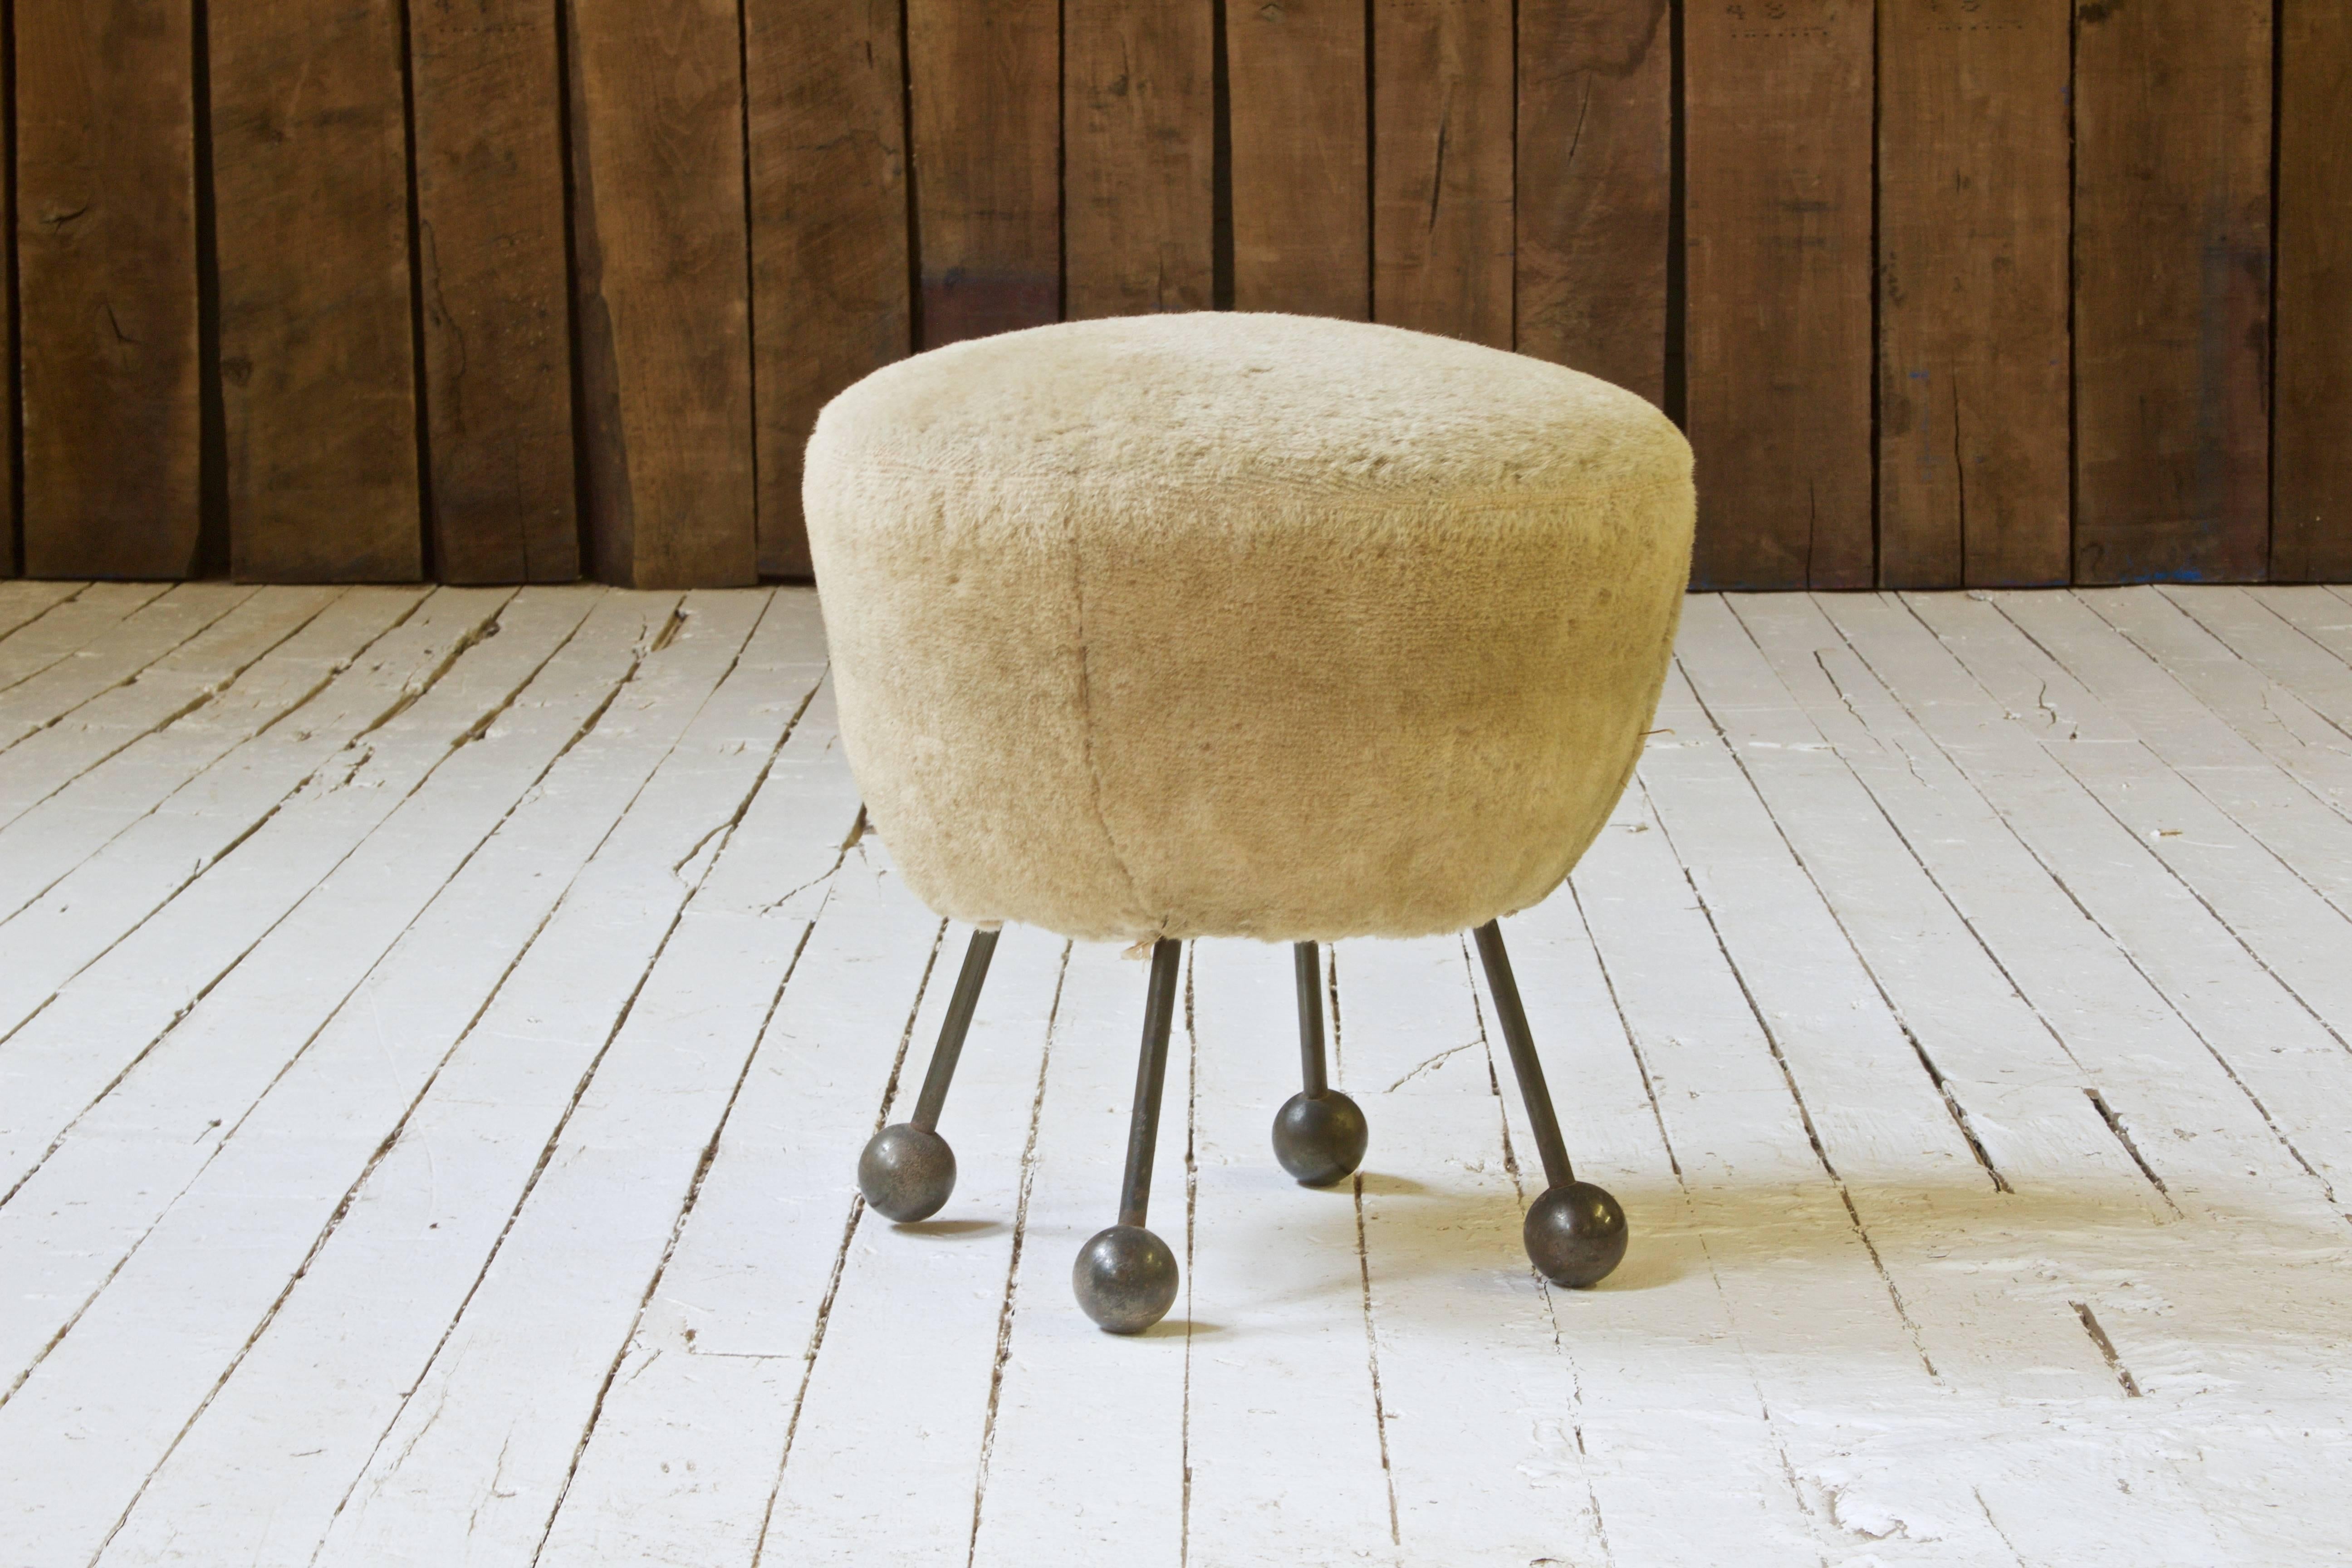 Extremely rare faux fur upholstered pouf with hammered bronze ball feet attributed to Jean Royere. This piece shares many similarities with designs conceived within Royere's 